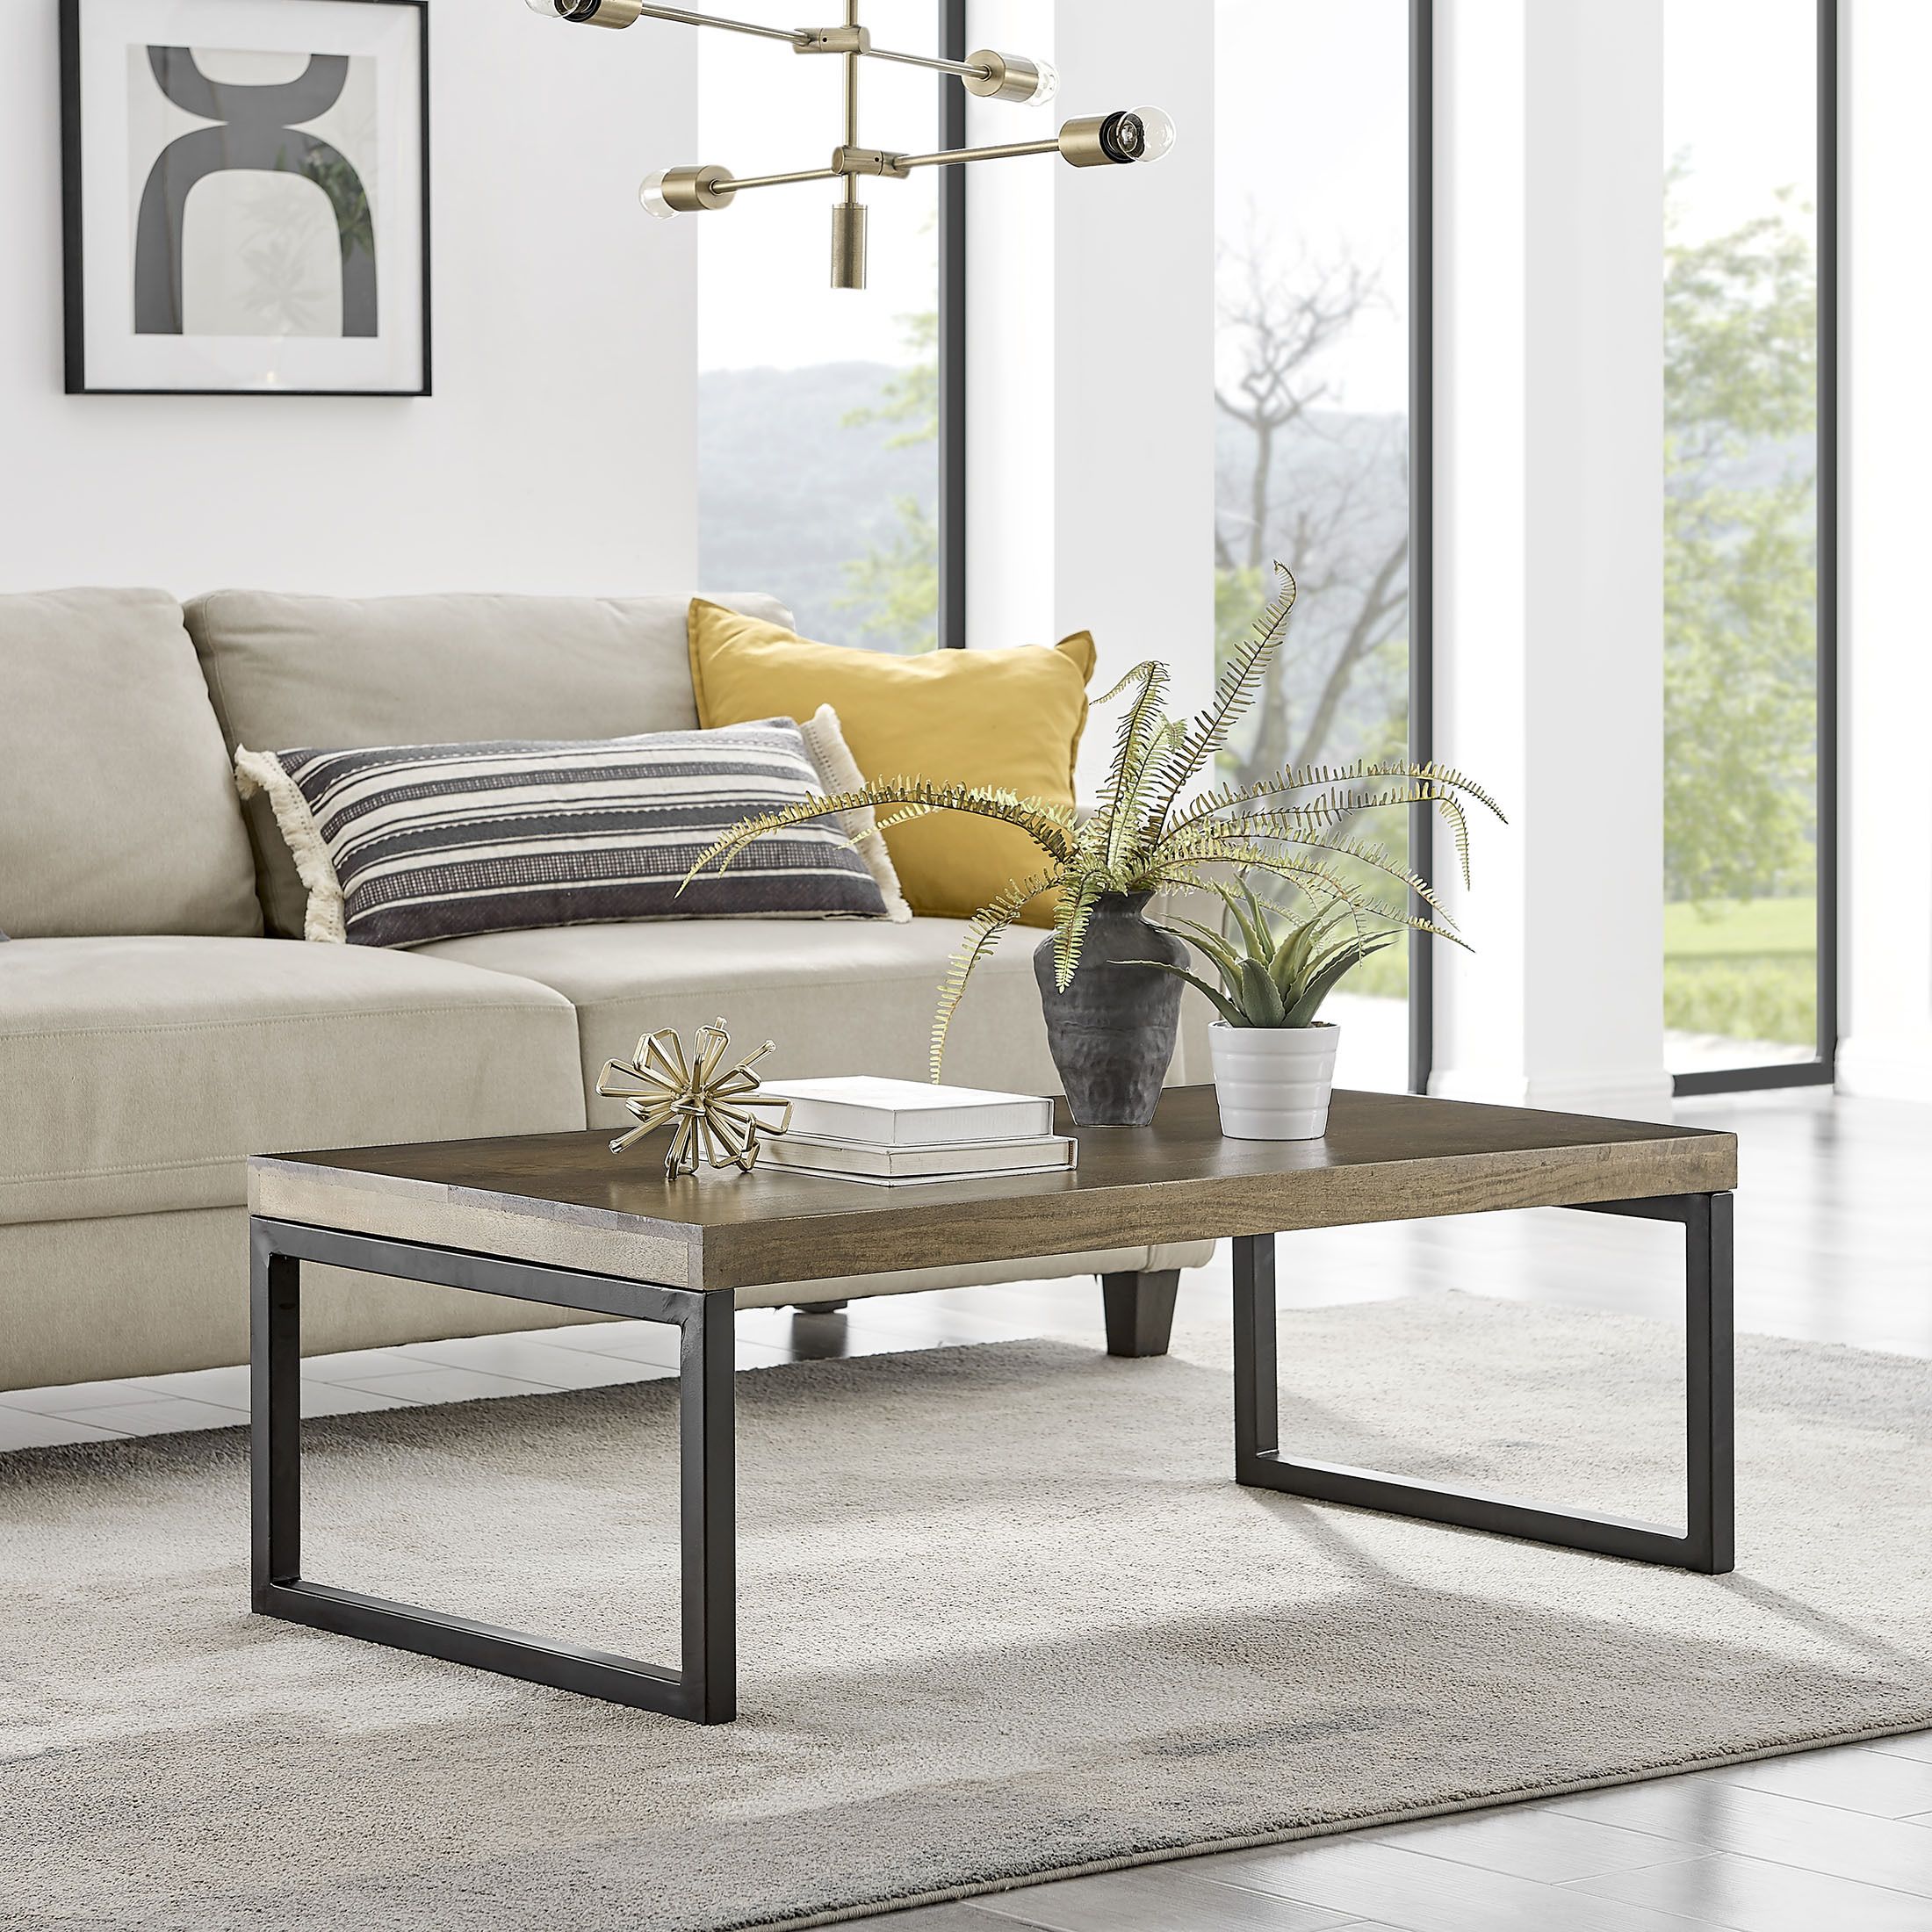 Famous Coffee Tables With Solid Legs Inside Kins Solid Honey Wood & Chrome Metal Leg Coffee Table – Daijaa (View 9 of 10)